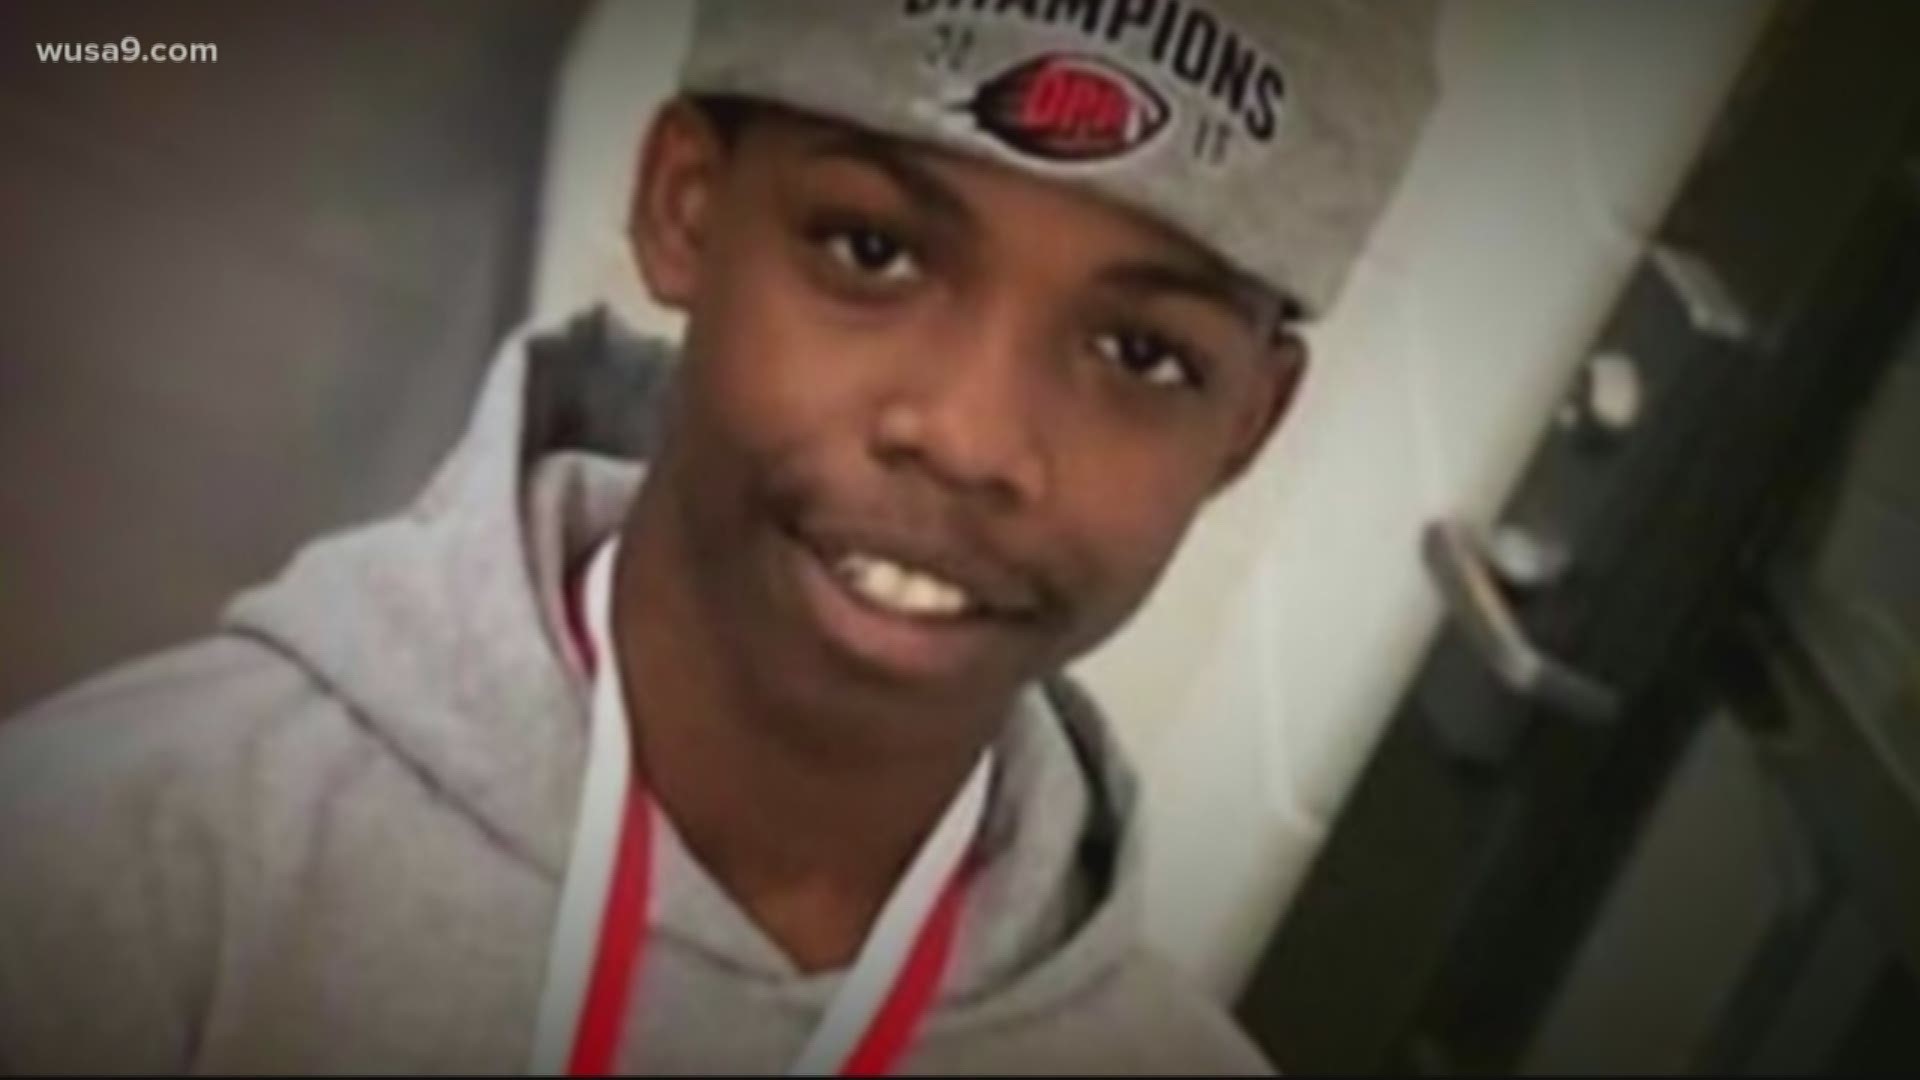 15-year-old Gerald Watson was shot to death on December 13, 2018.